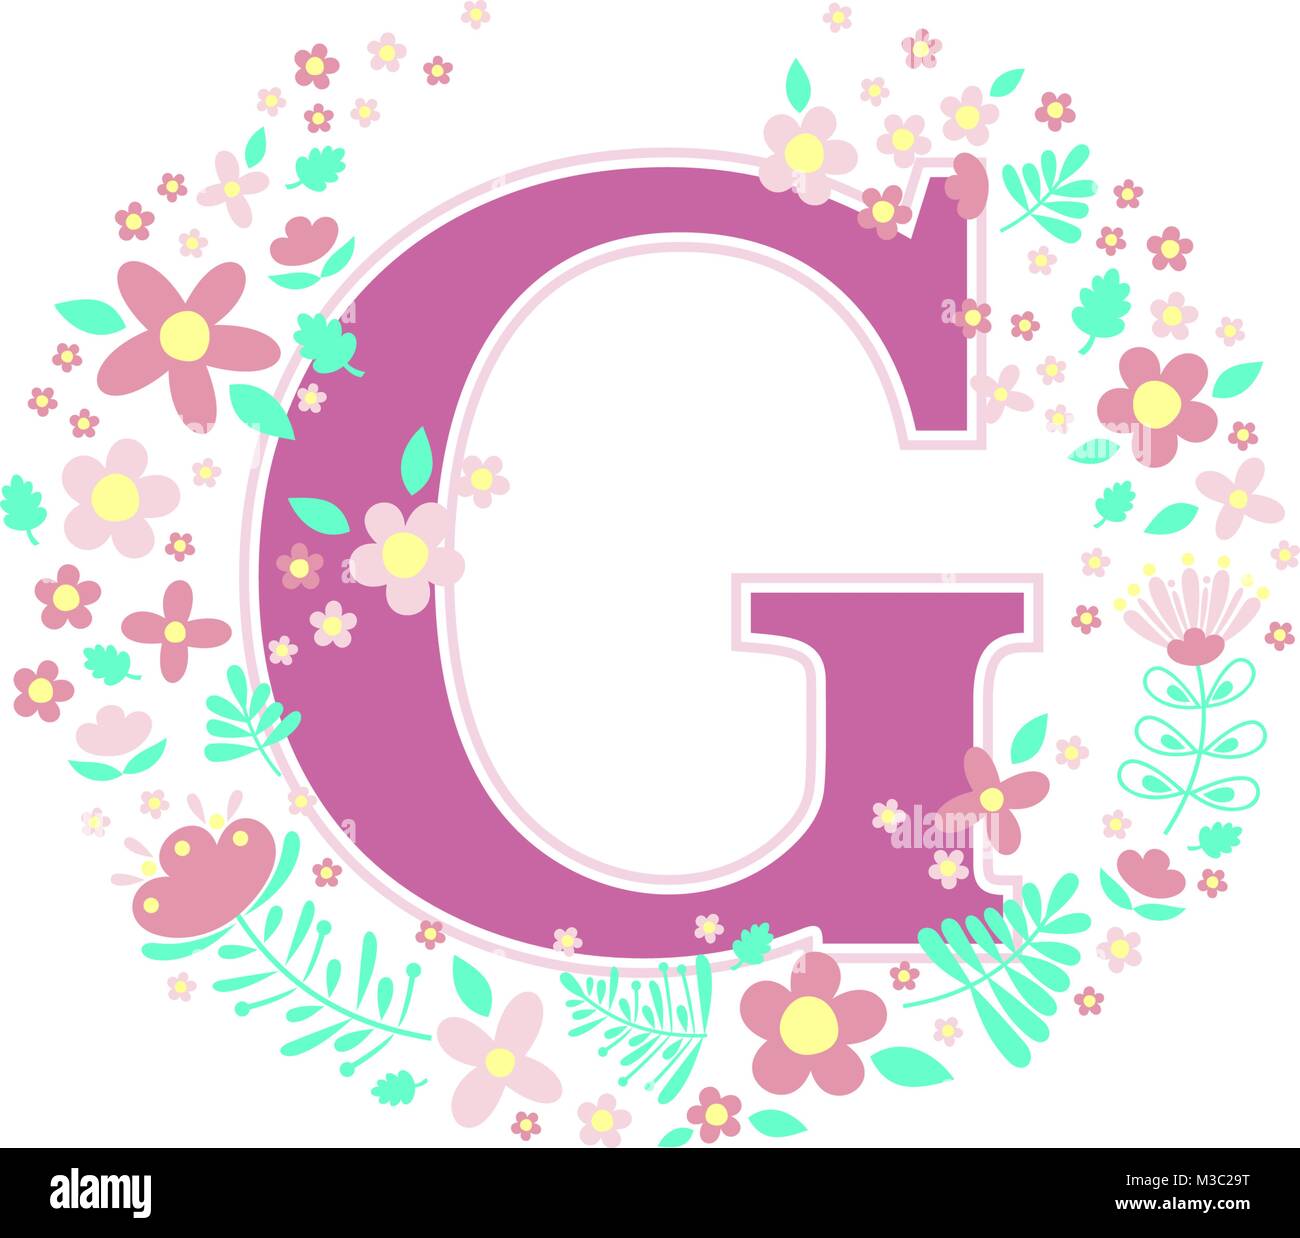 initial letter g with decorative flowers and design elements isolated on white background. can be used for baby name, nursery decoration, spring theme Stock Vector